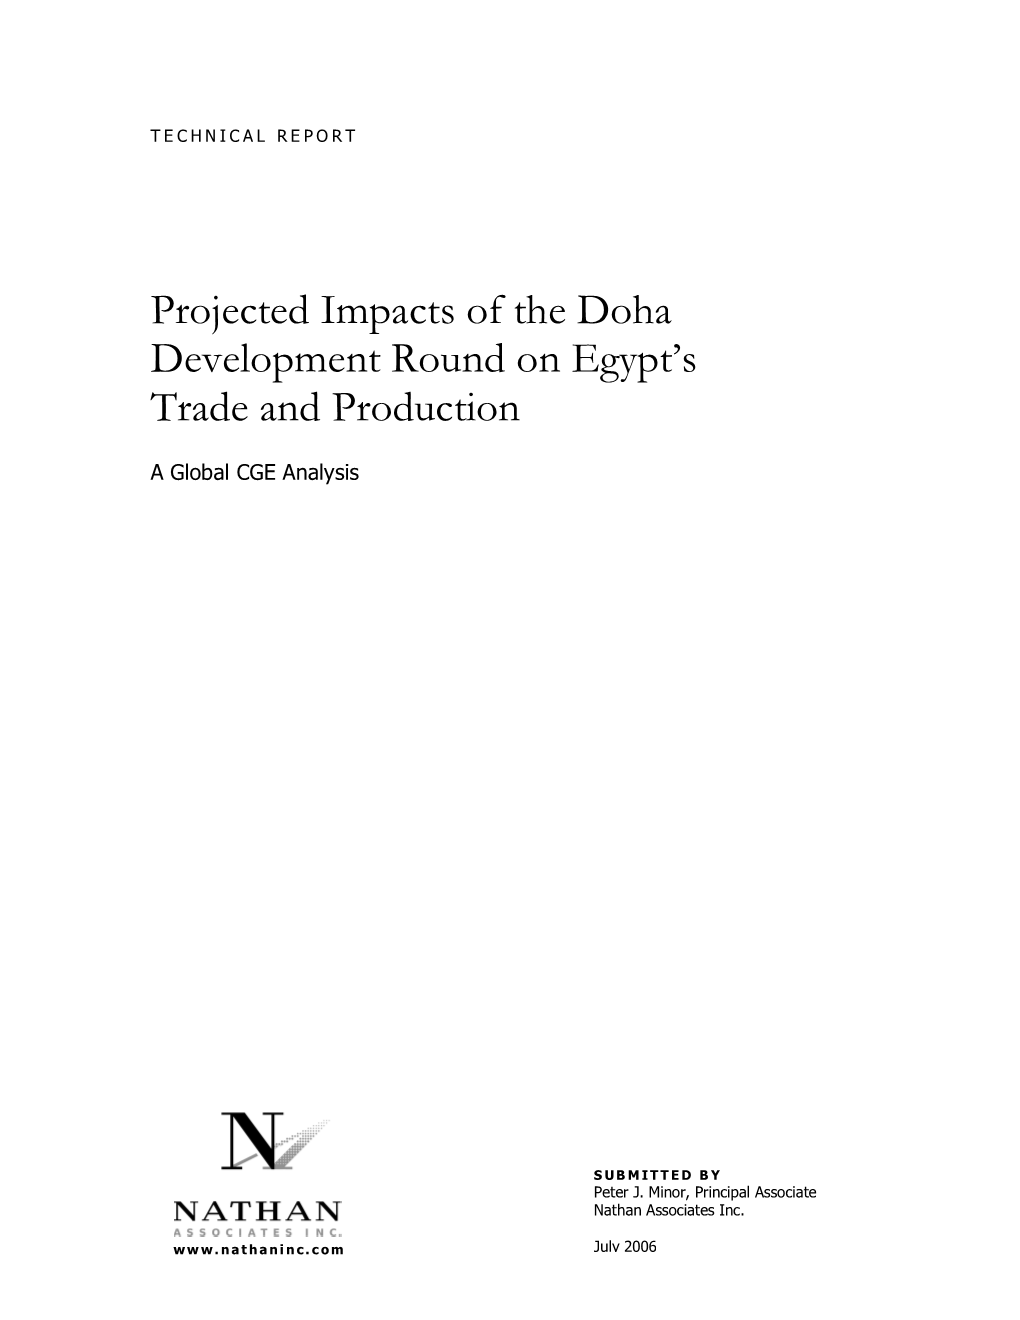 Projected Impacts of the Doha Development Round on Egypt's